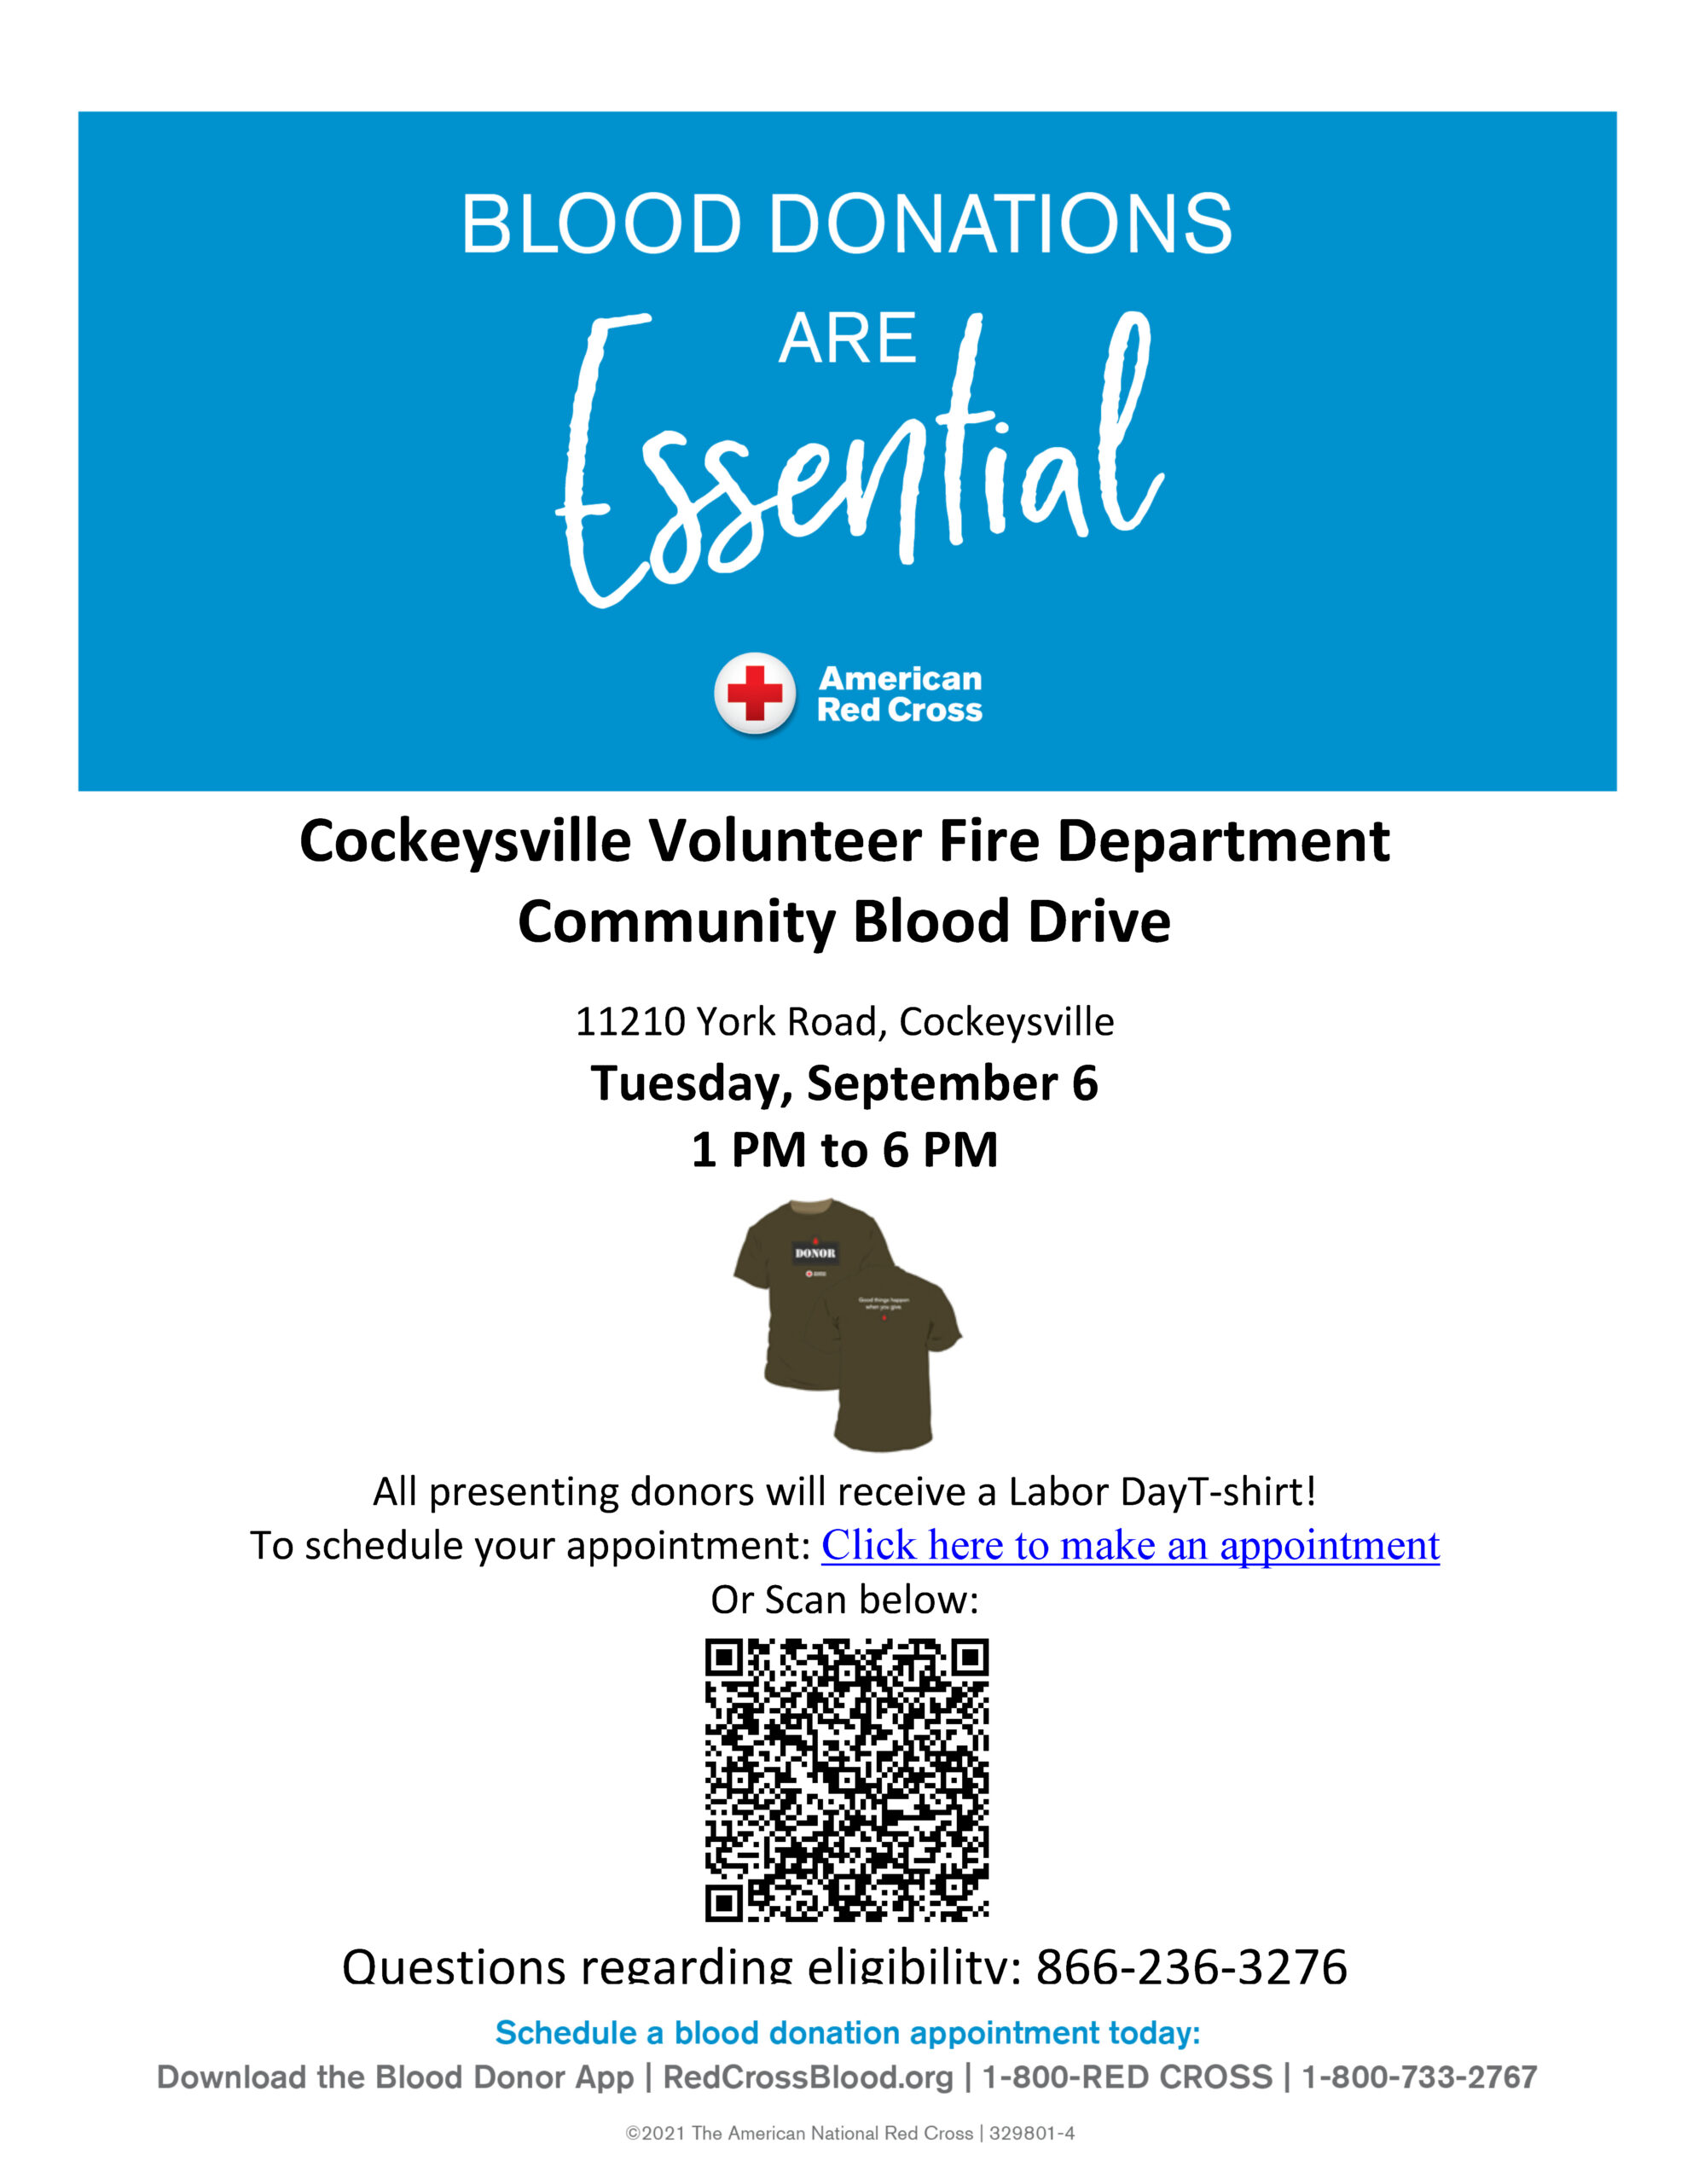 CVFC to Host Blood Drive